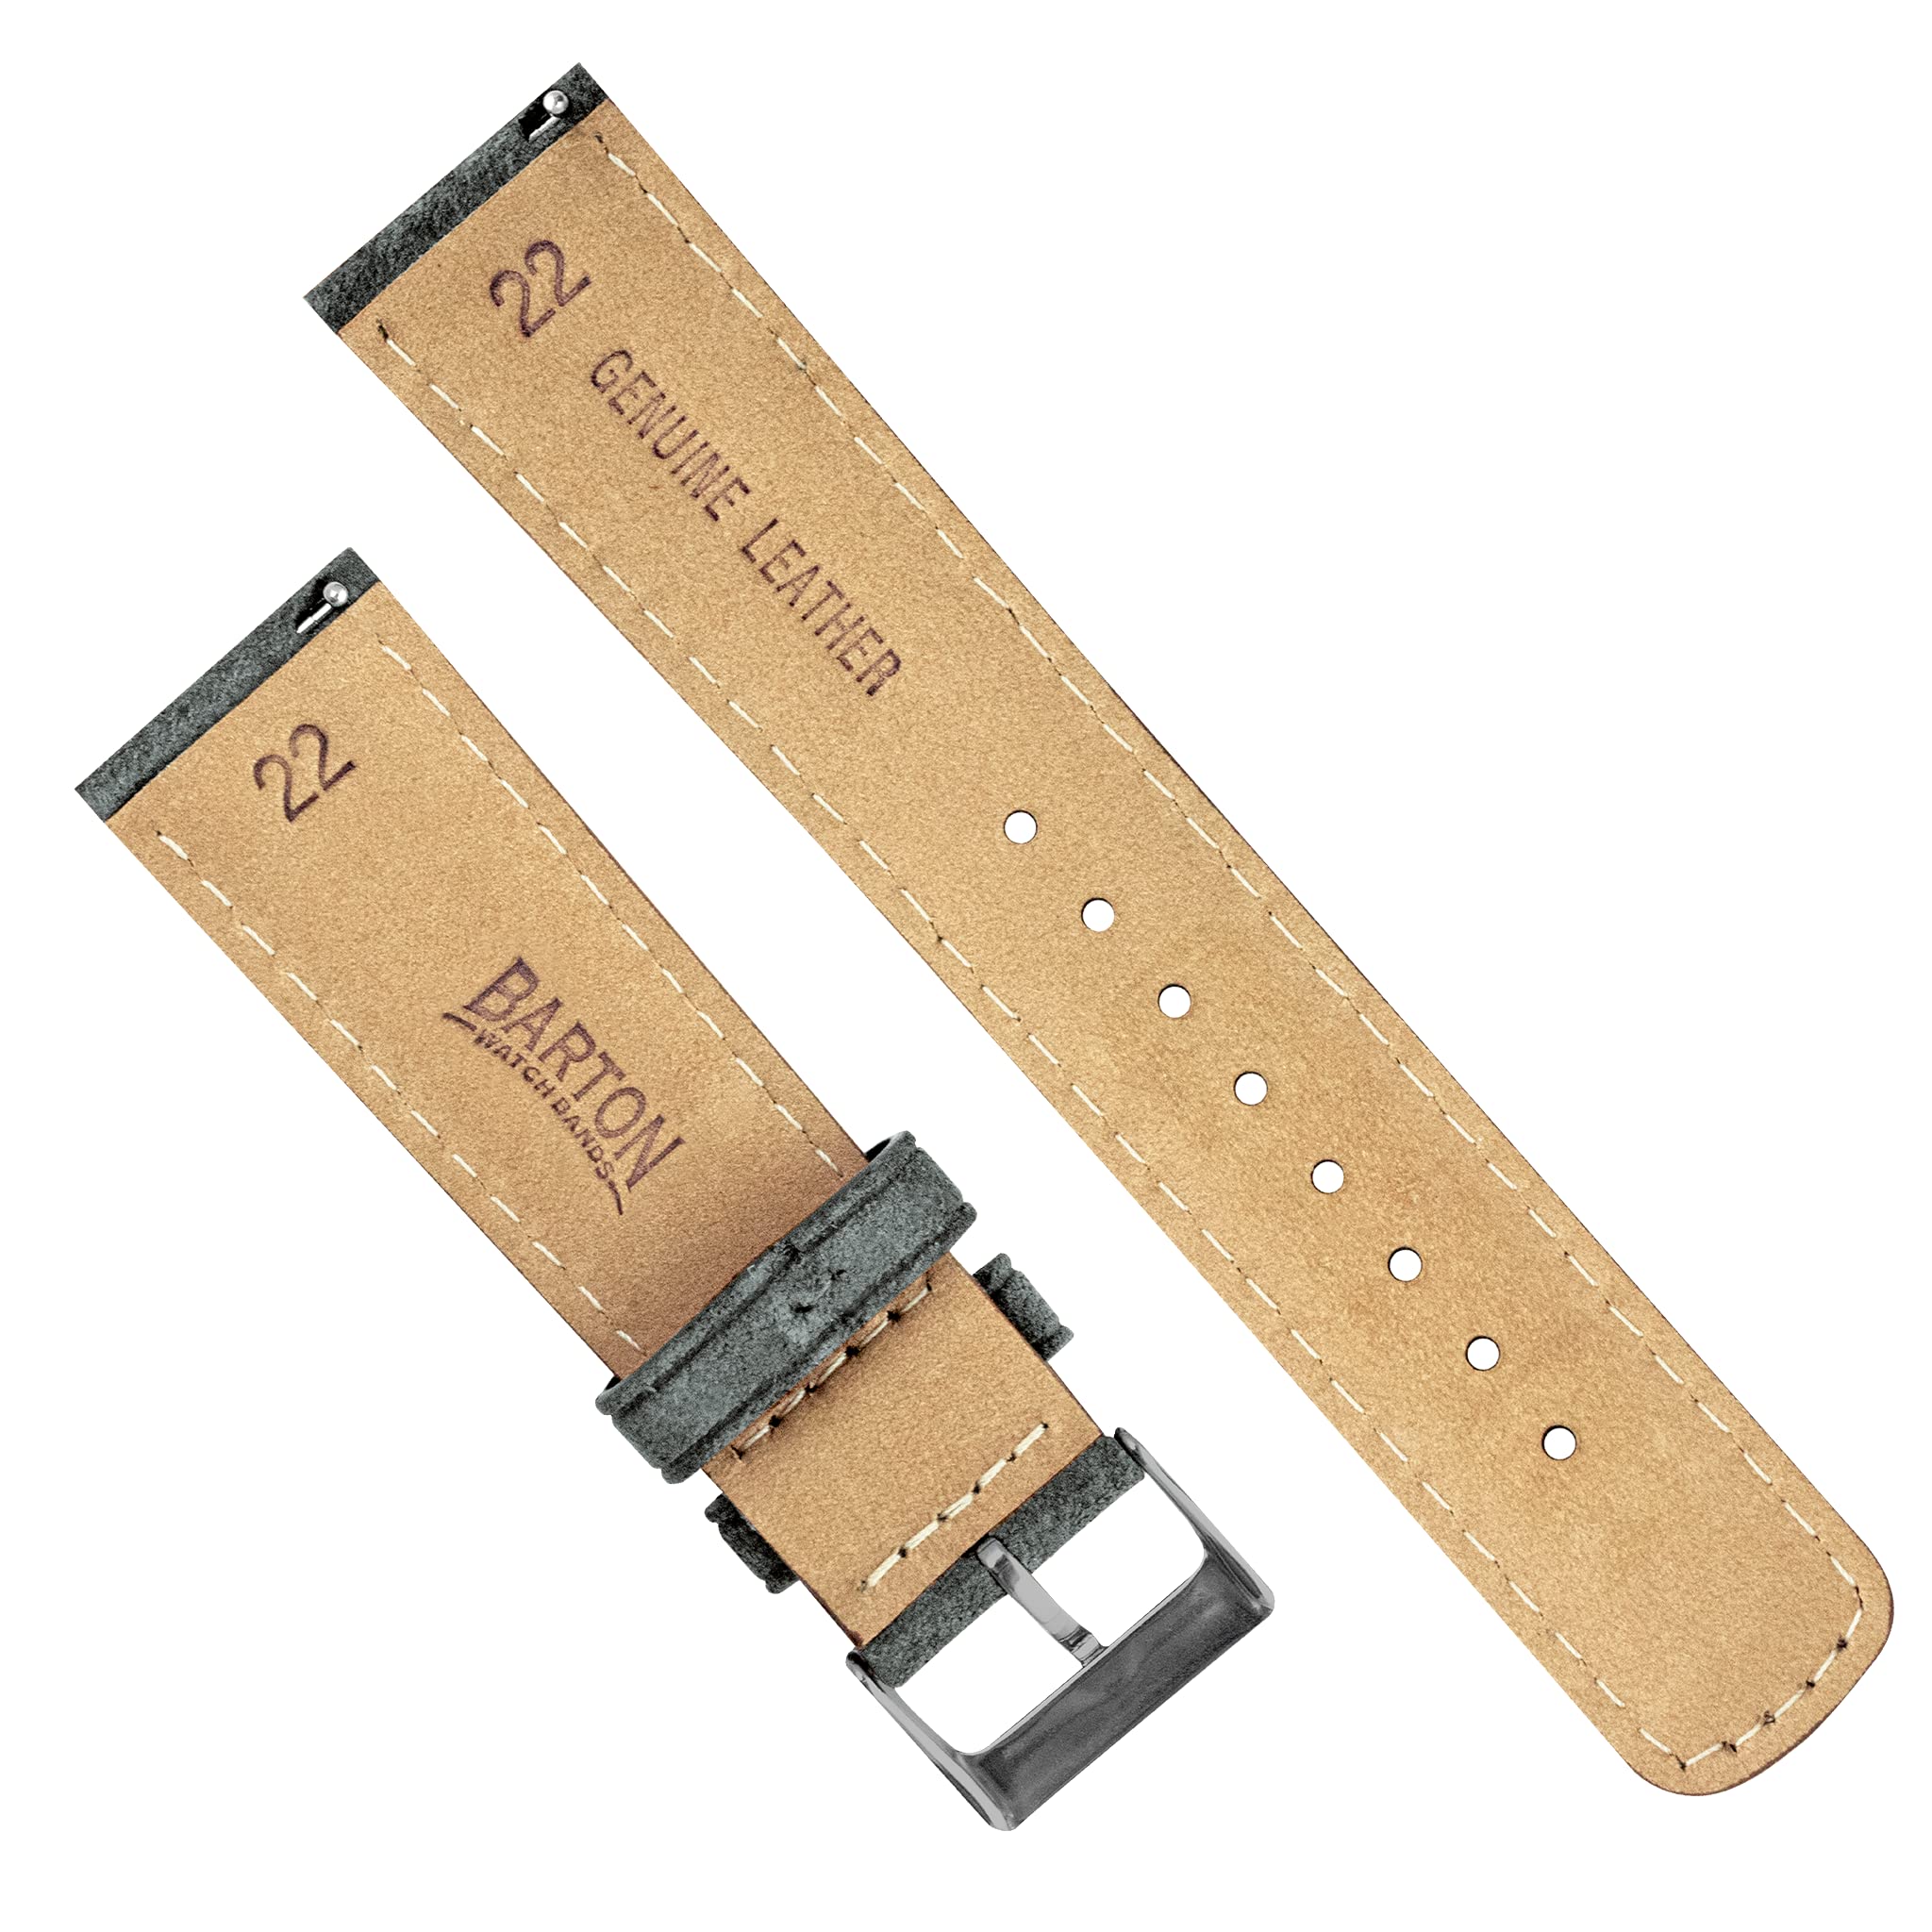 BARTON Suede Leather Watch Bands - Quick Release - Choose Strap Color & Size - 18mm, 19mm, 20mm, 21mm, 22mm, 23mm & 24mm Watch Straps